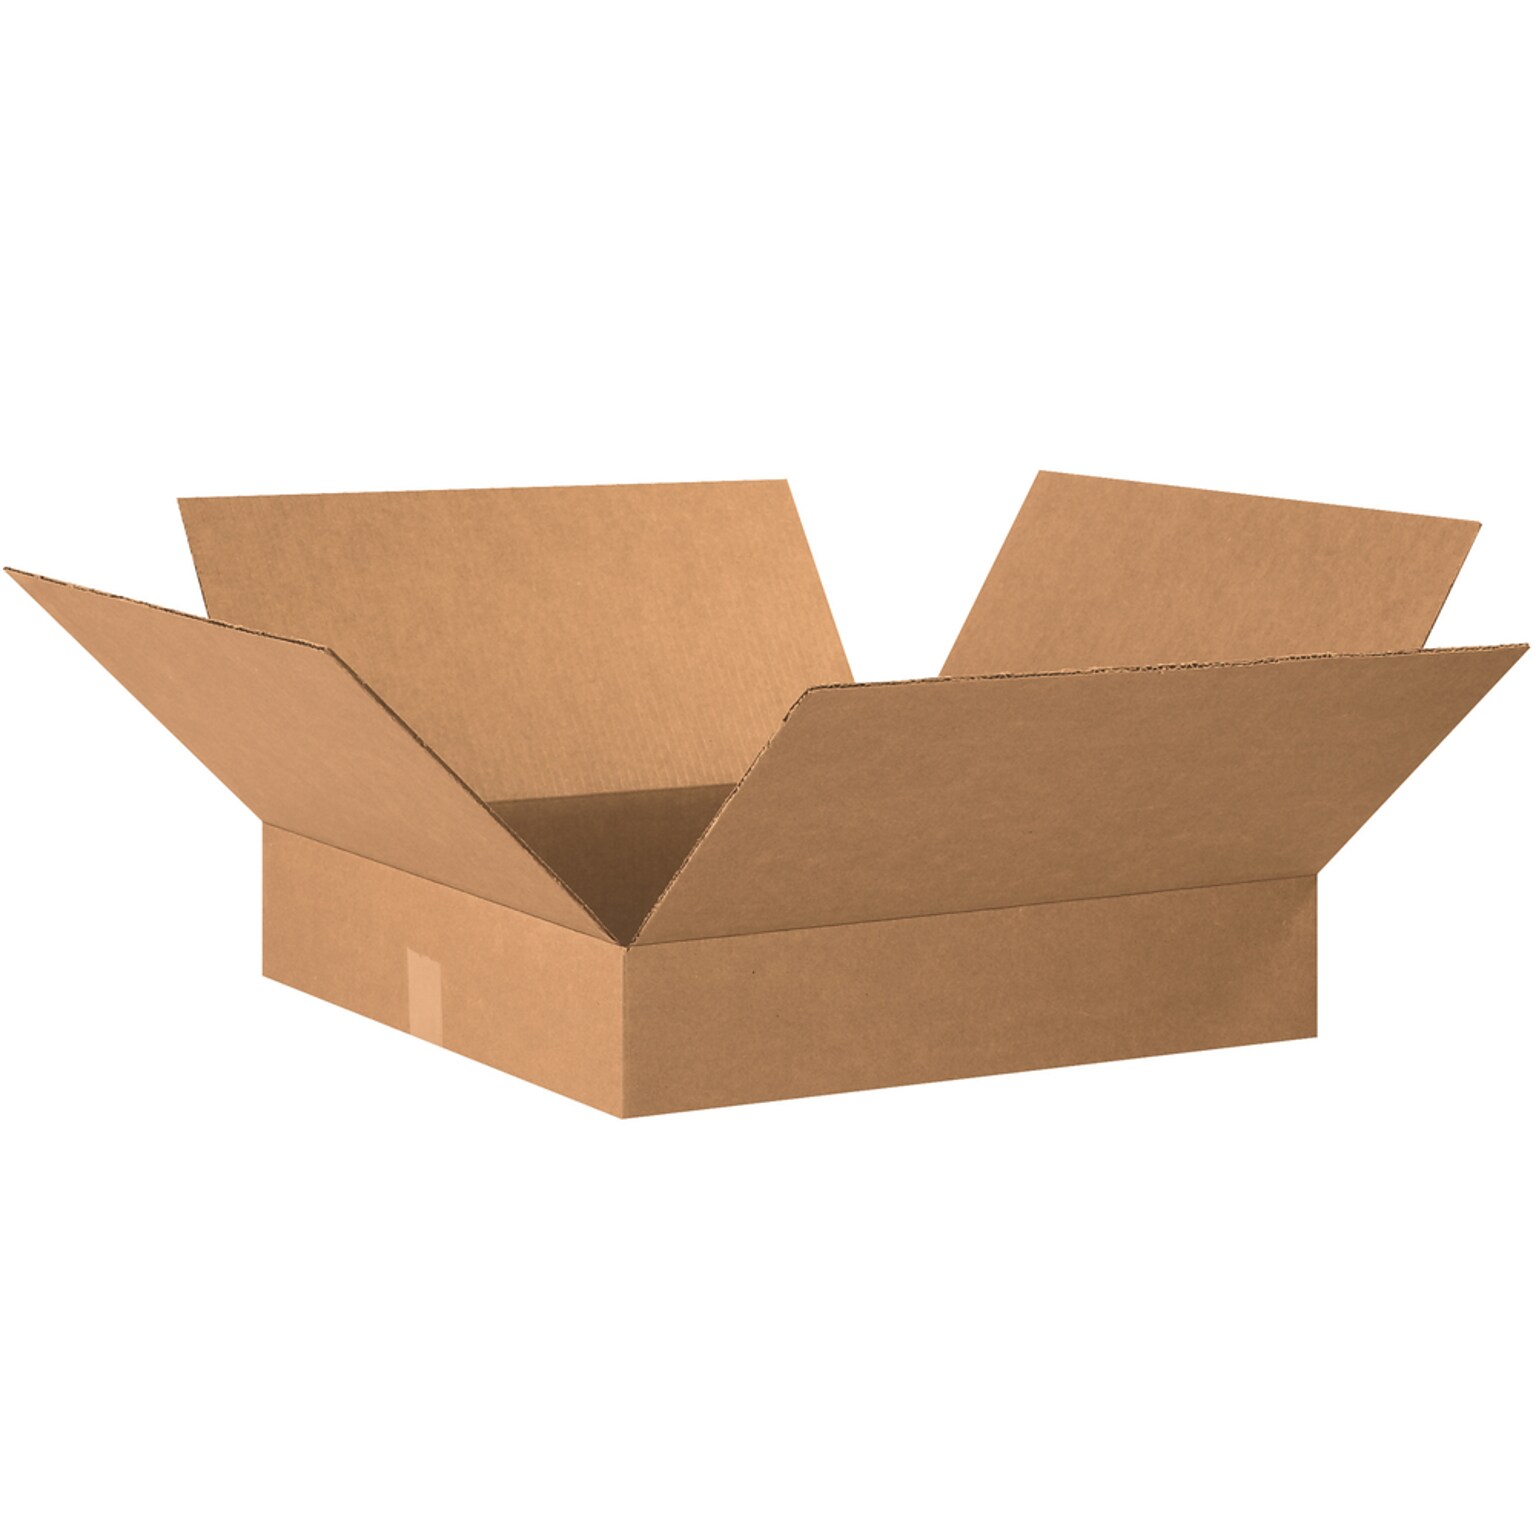 SI Products 20 x 20 x 4 Corrugated Shipping Boxes, 200#/ECT-32 Mullen Rated Corrugated, Pack of 10, (20204)